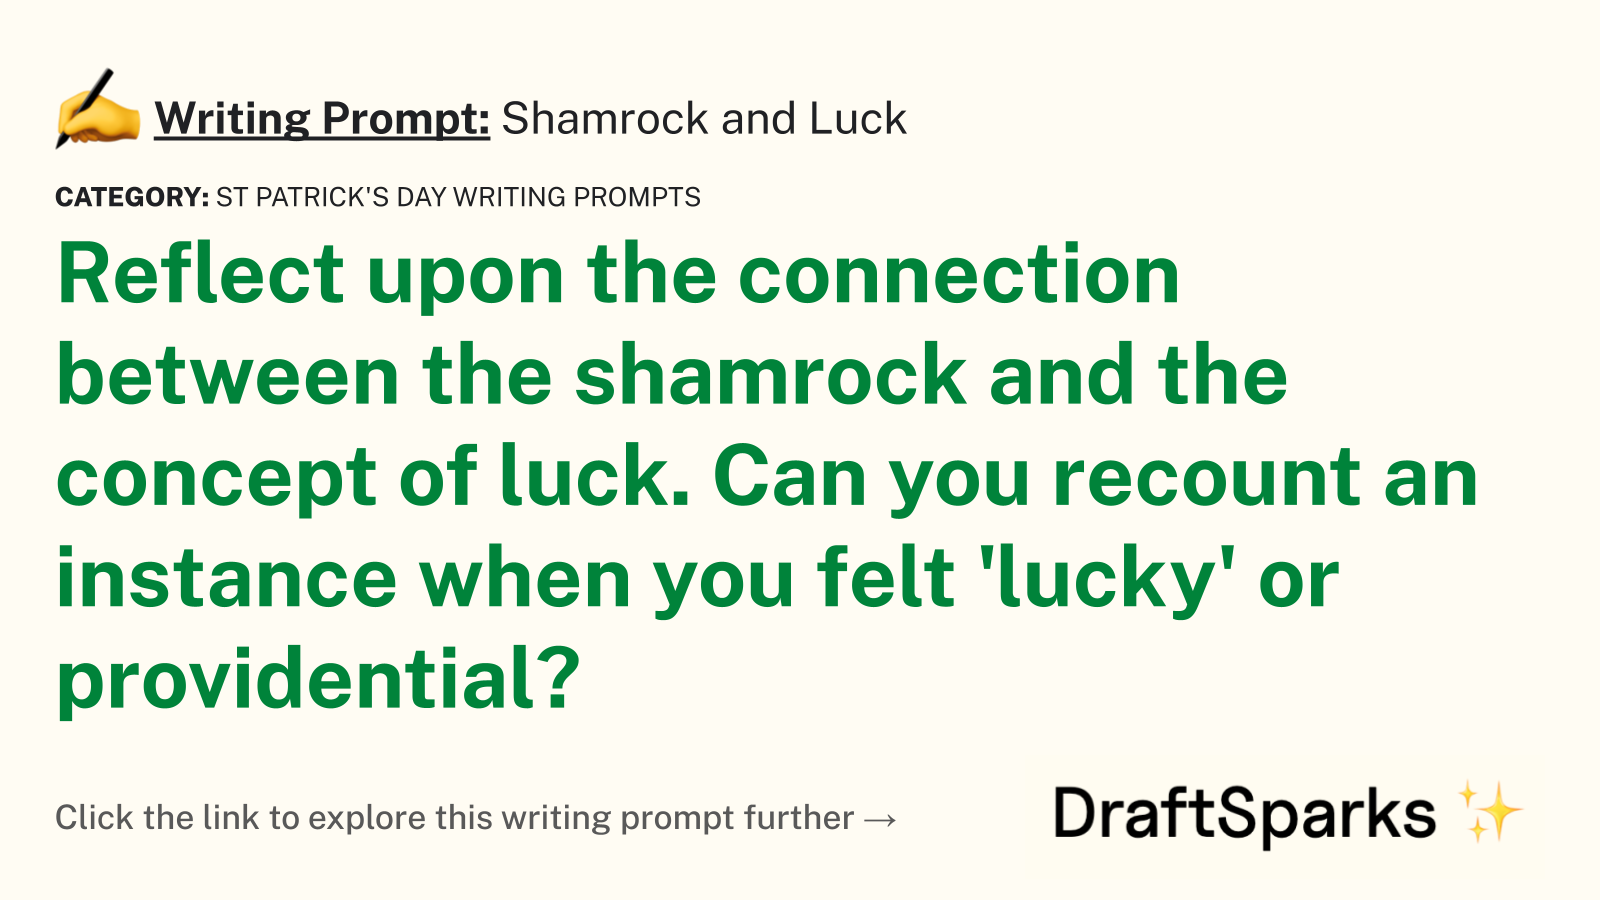 Shamrock and Luck